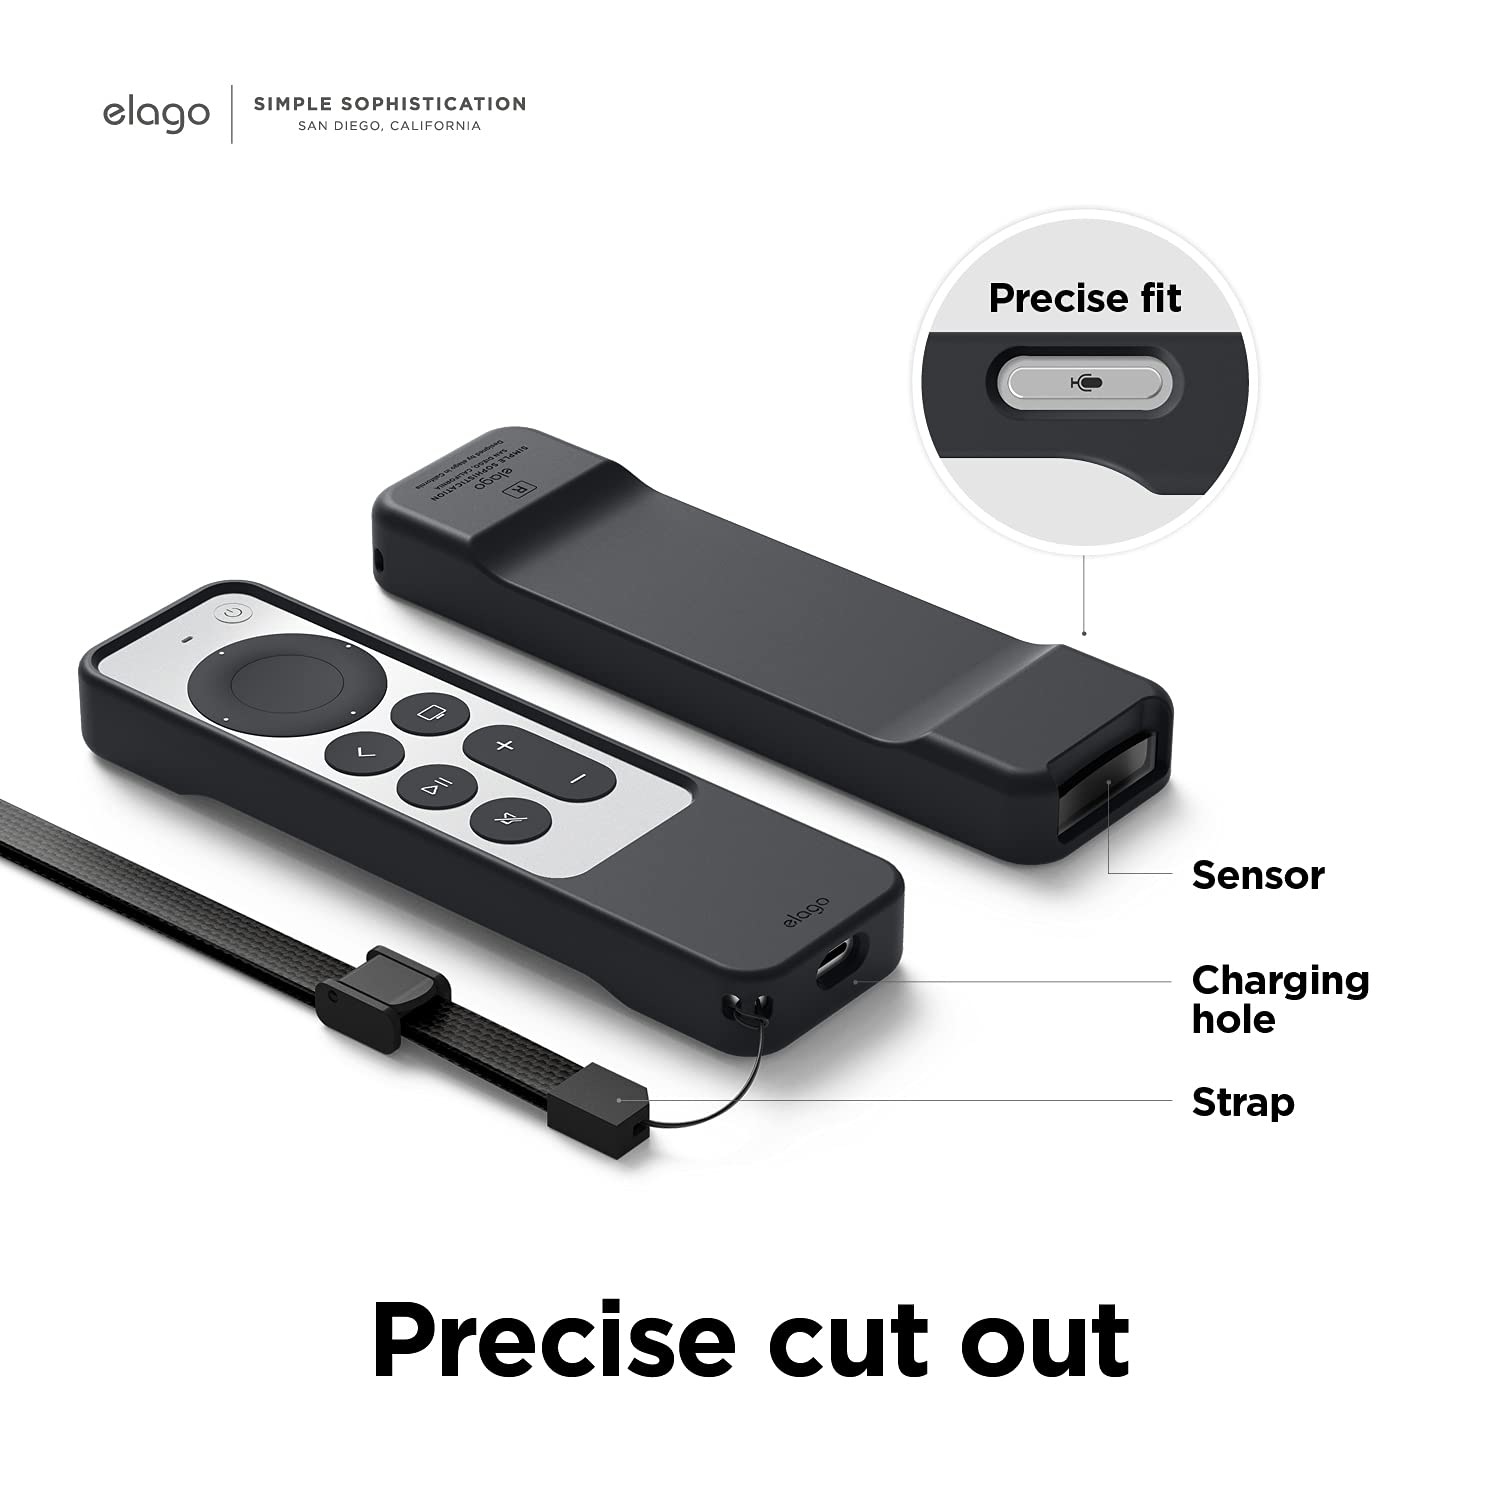 elago R1 Case Compatible with 2022 Apple TV 4K Siri Remote 3rd Gen, Compatible with 2021 Apple TV Siri Remote 2nd Gen- Magnet Technology, Lanyard Included, Full Access to All Functions [Black]